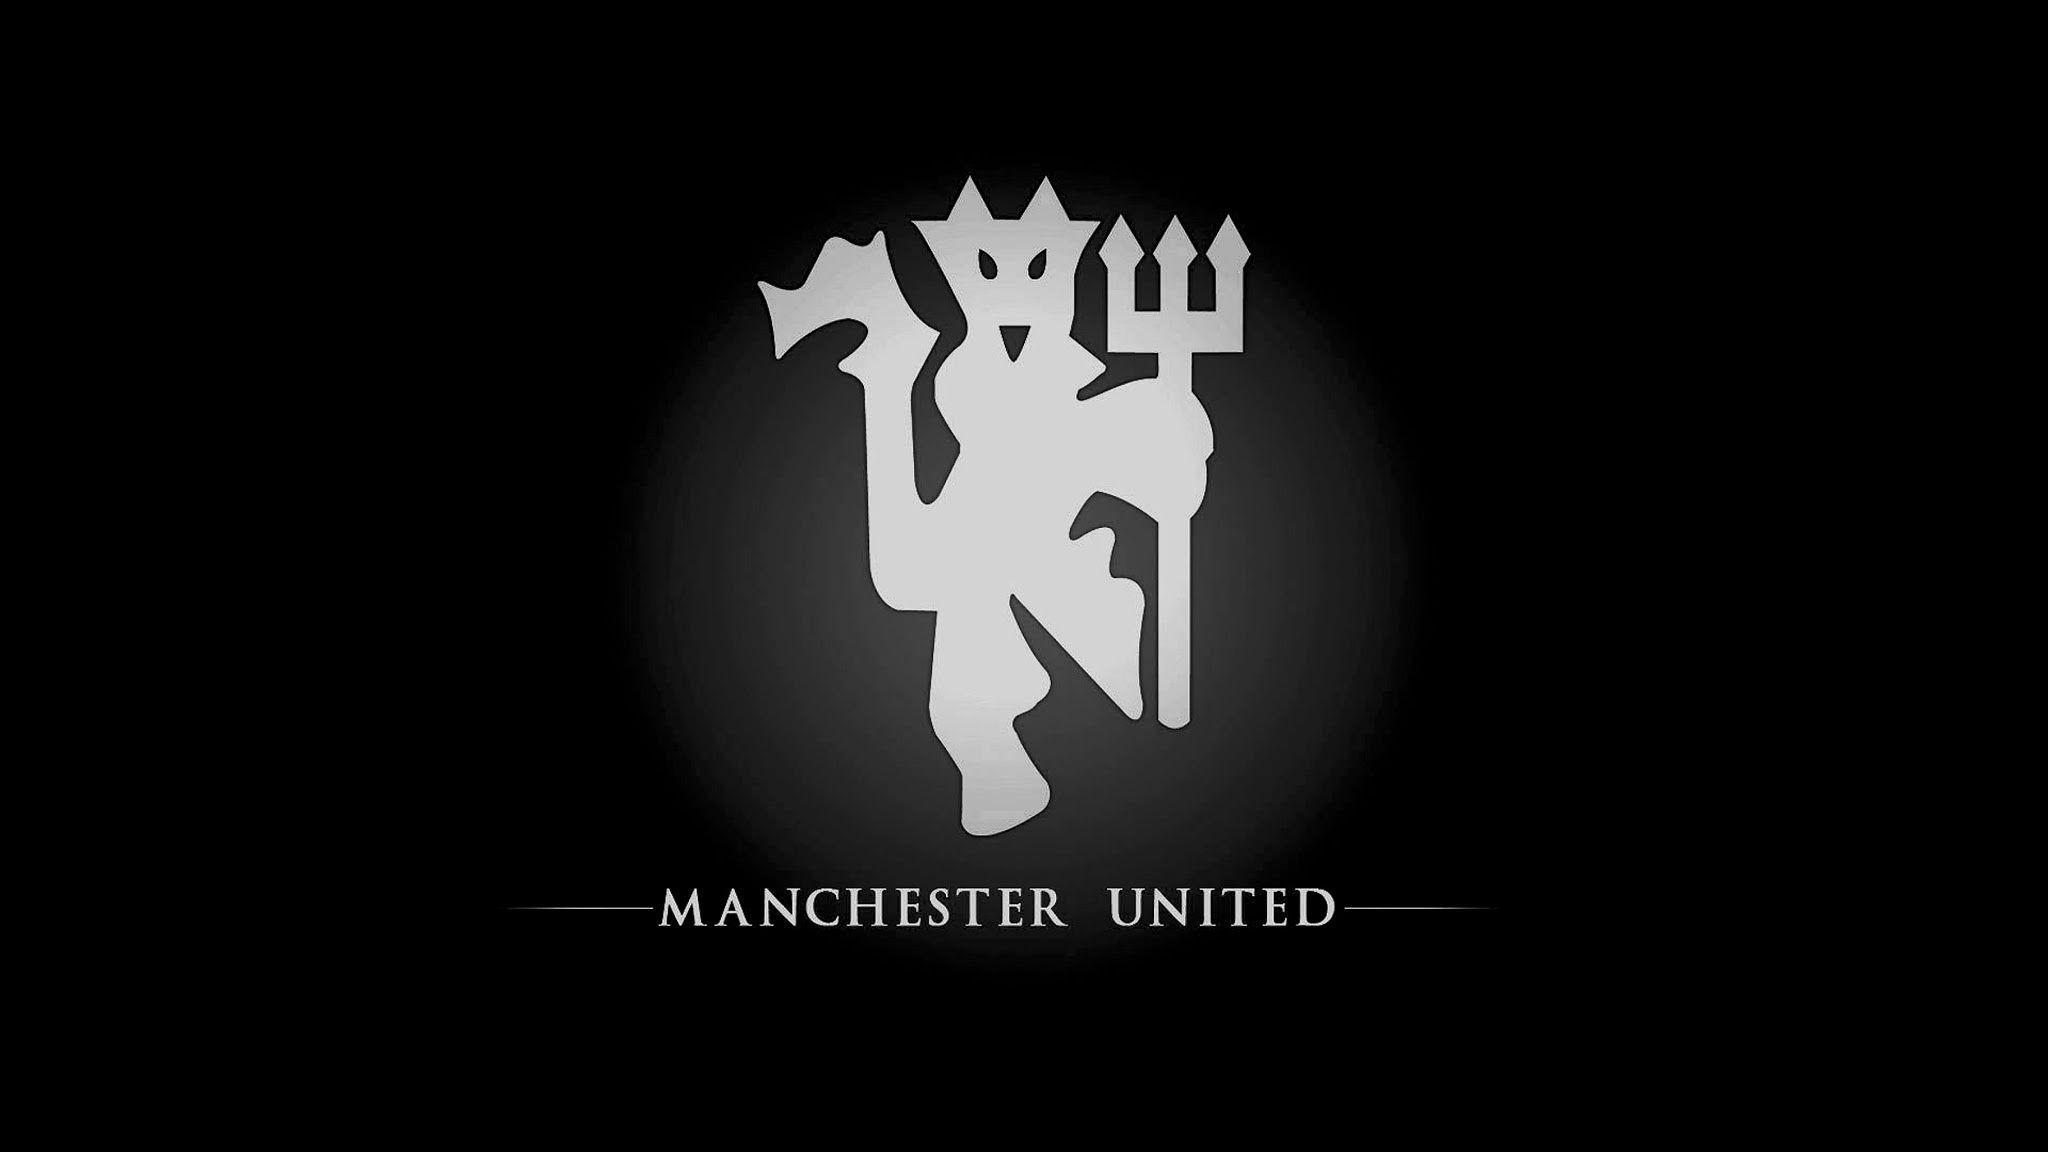 Image For > Manchester United Logo Black And White Wallpapers